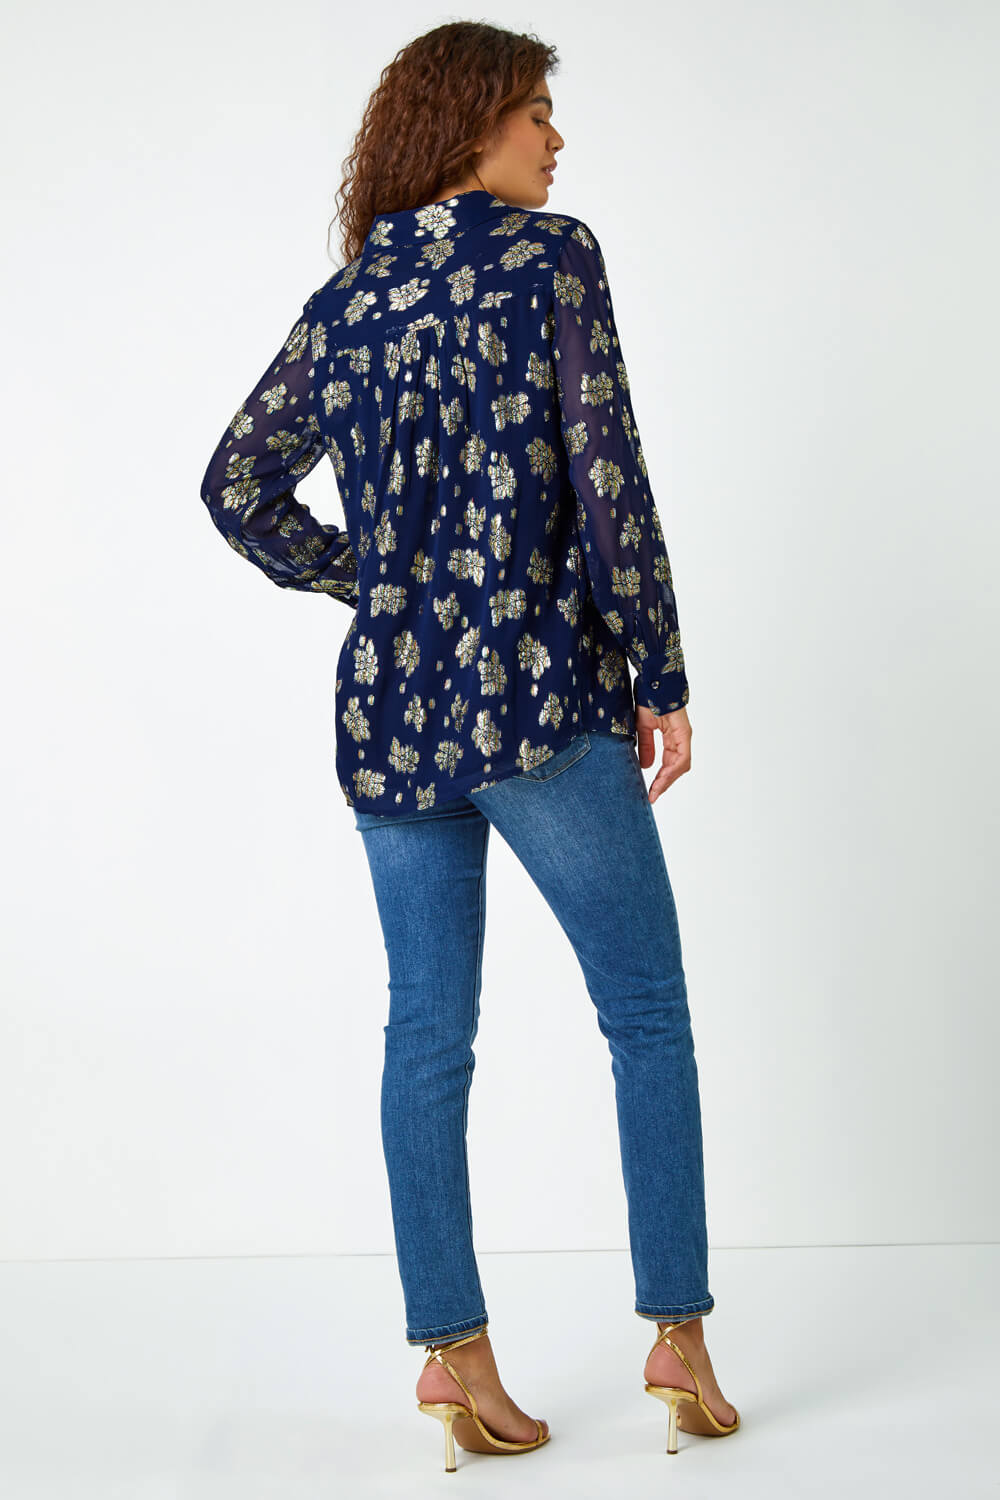 Midnight Blue Metallic Floral Print Blouse, Image 4 of 5